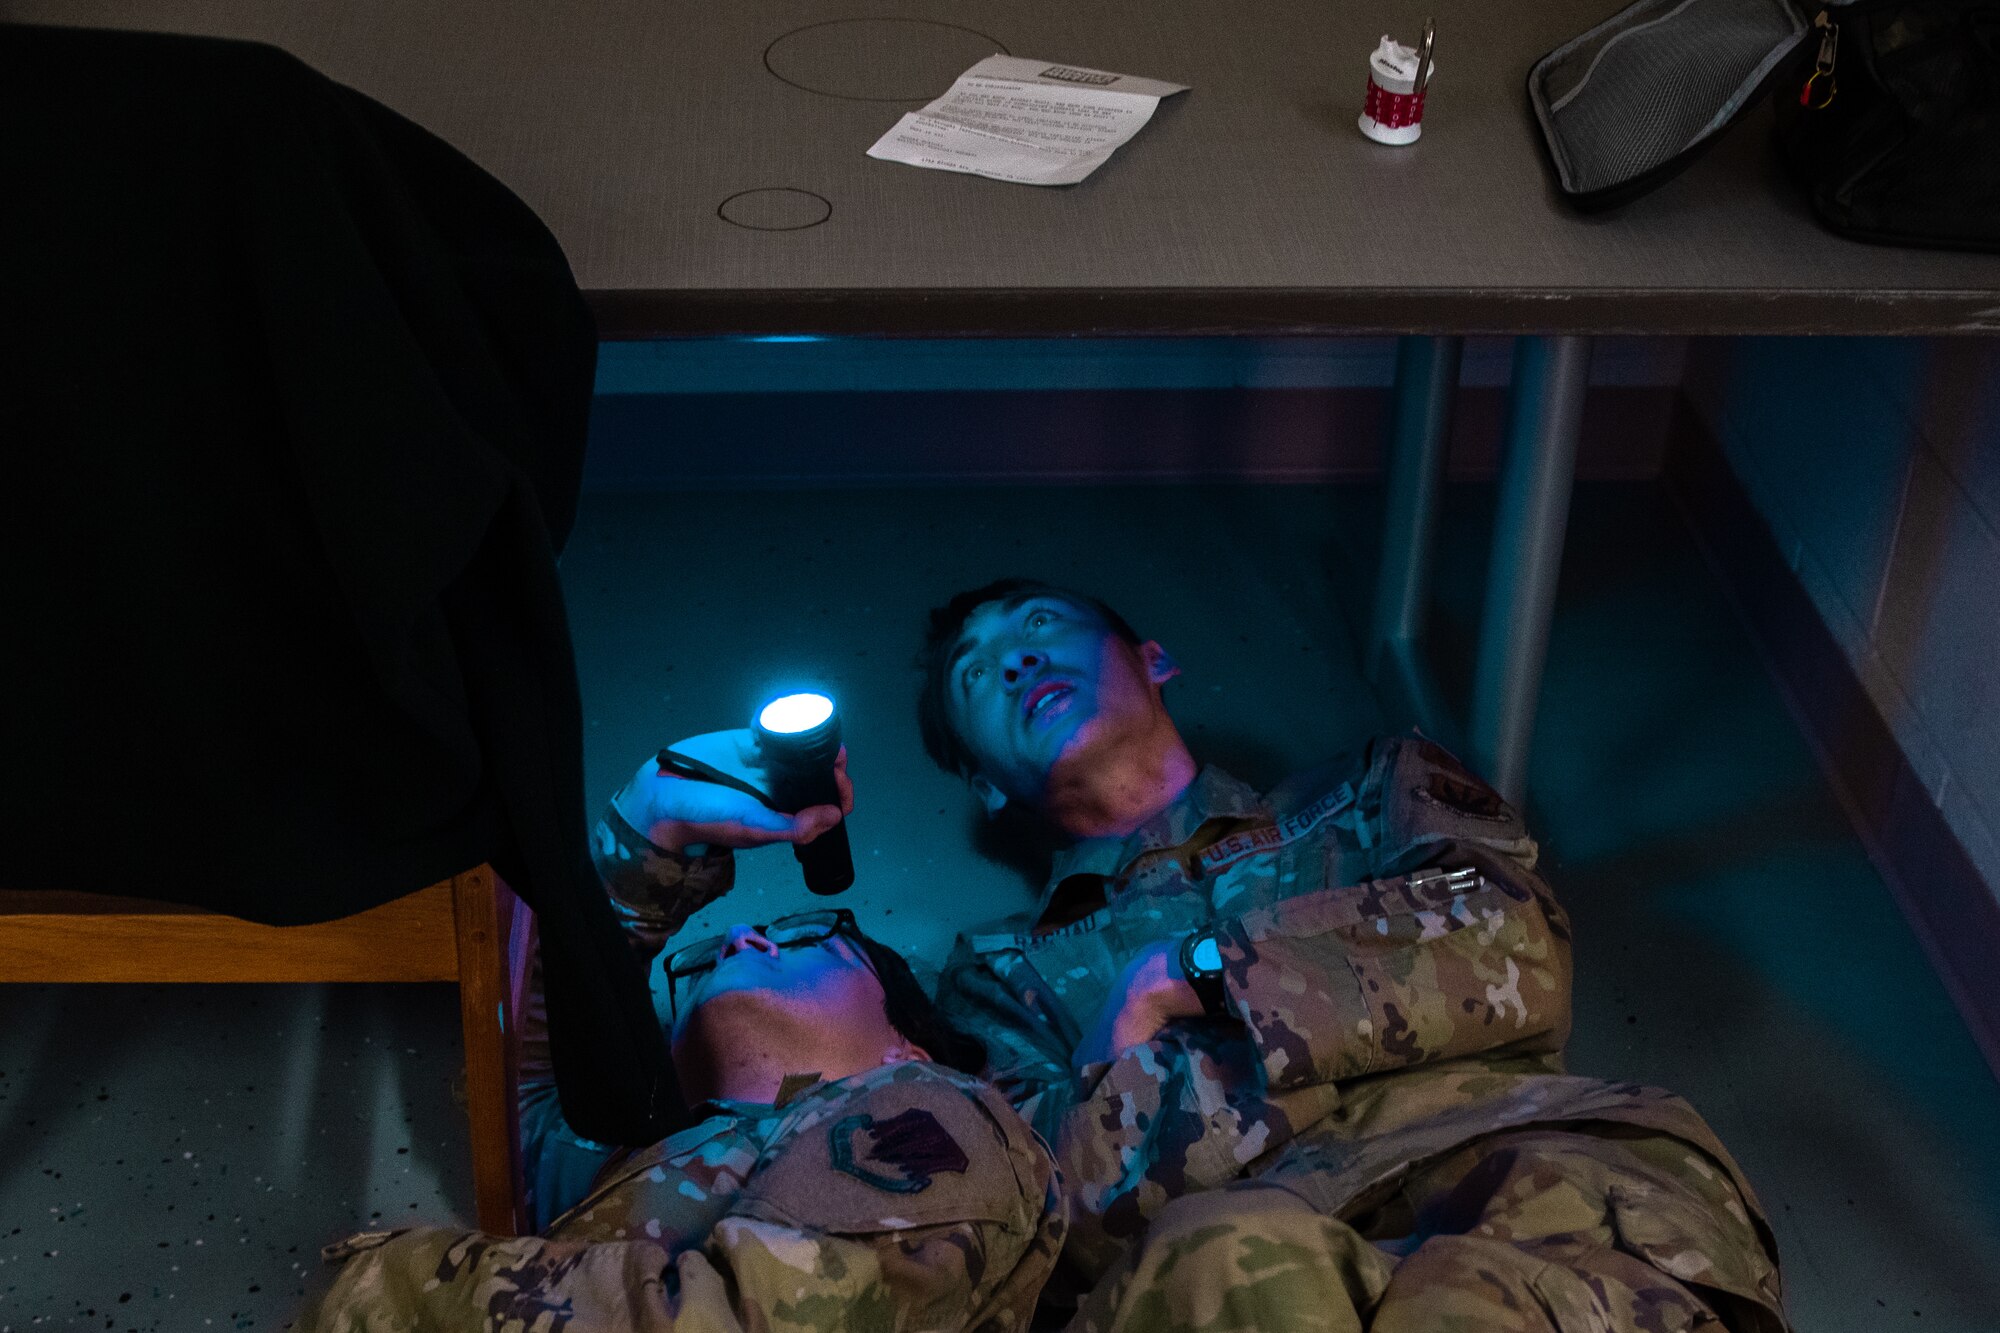 Airmen uncover clues in a discovery room exercise.